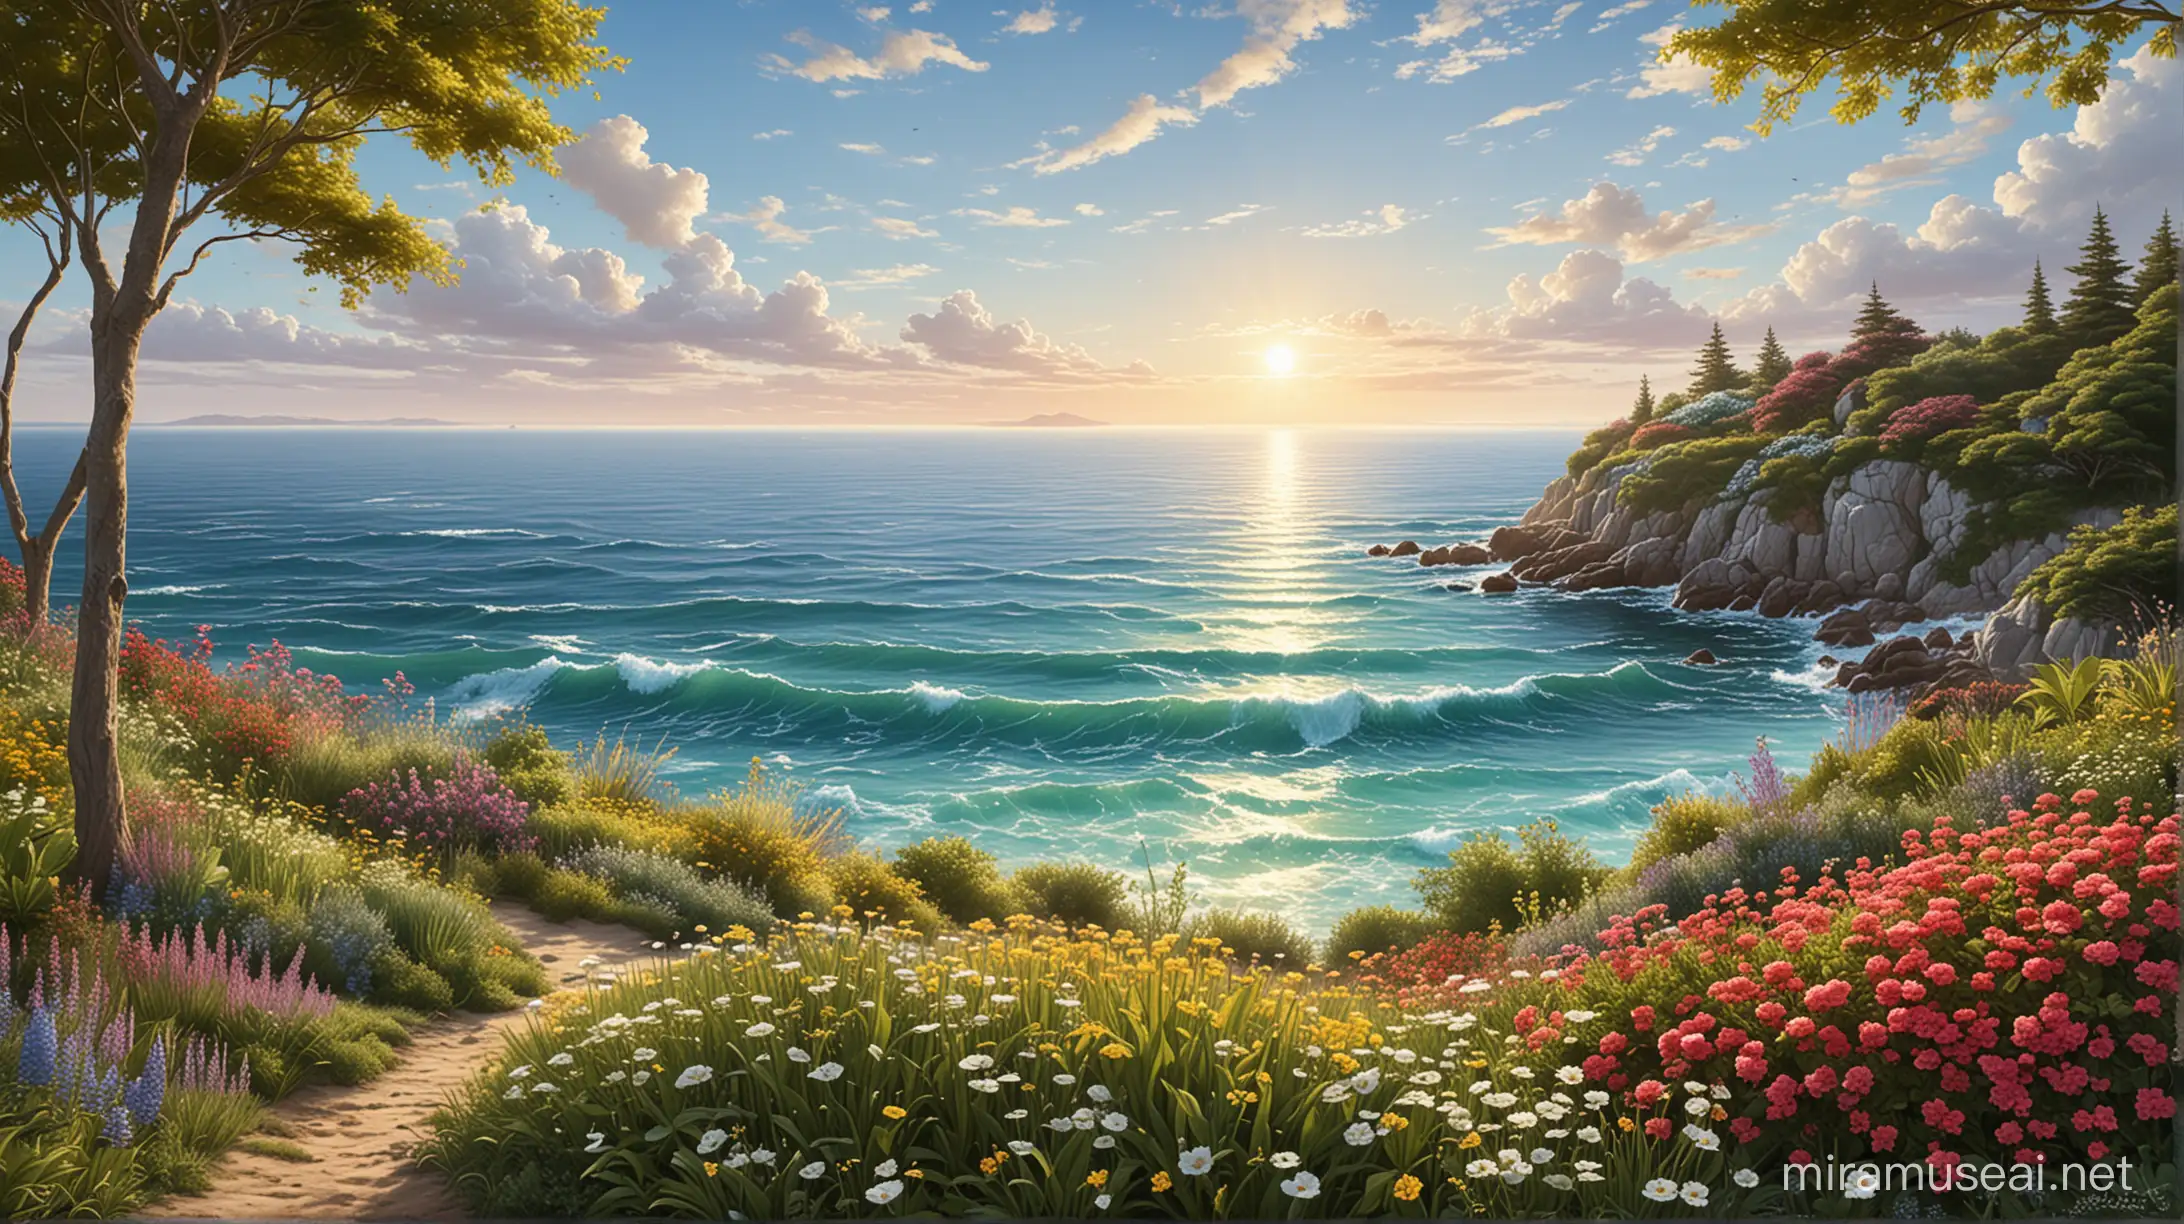 Create a photorealistic painting that captures the essence of a warm and sunny day. The scene unfolds around a serene ocean with clear turquoise waters reflecting the bright sunlight. The sky above is a brilliant azure with a few wispy clouds, and the sun shines down from its high noon position, casting a radiant light across the seascape. On the shore, there's a lush garden abundant with a variety of flowers in full bloom—reds, pinks, purples, yellows—interspersed with rich green foliage. The garden extends to the water’s edge, where gentle waves kiss the land. The vibrancy of the garden contrasts beautifully with the calmness of the ocean, creating a harmonious balance between flora and the sea. The overall atmosphere is one of peace and perfect, natural harmony.